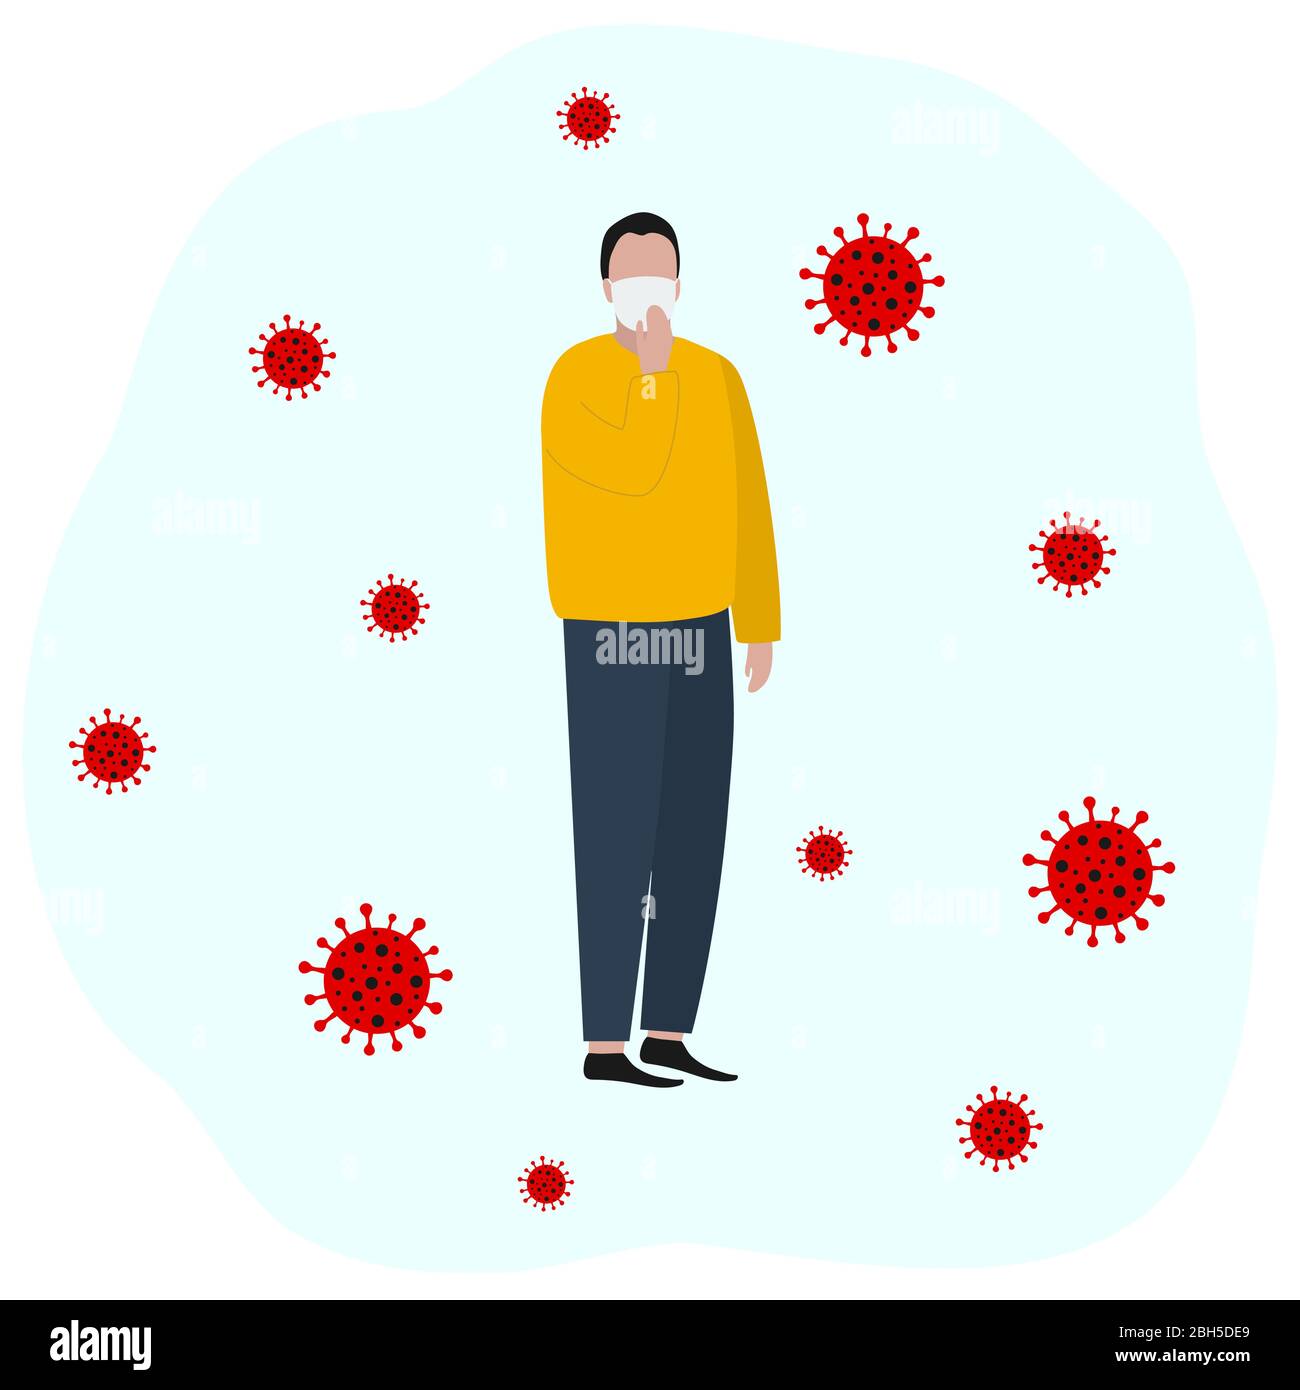 Man in a protective mask against viruses. Fashion trendy illustration, flat design. Pandemic and epidemic of coronavirus in the world Stock Vector